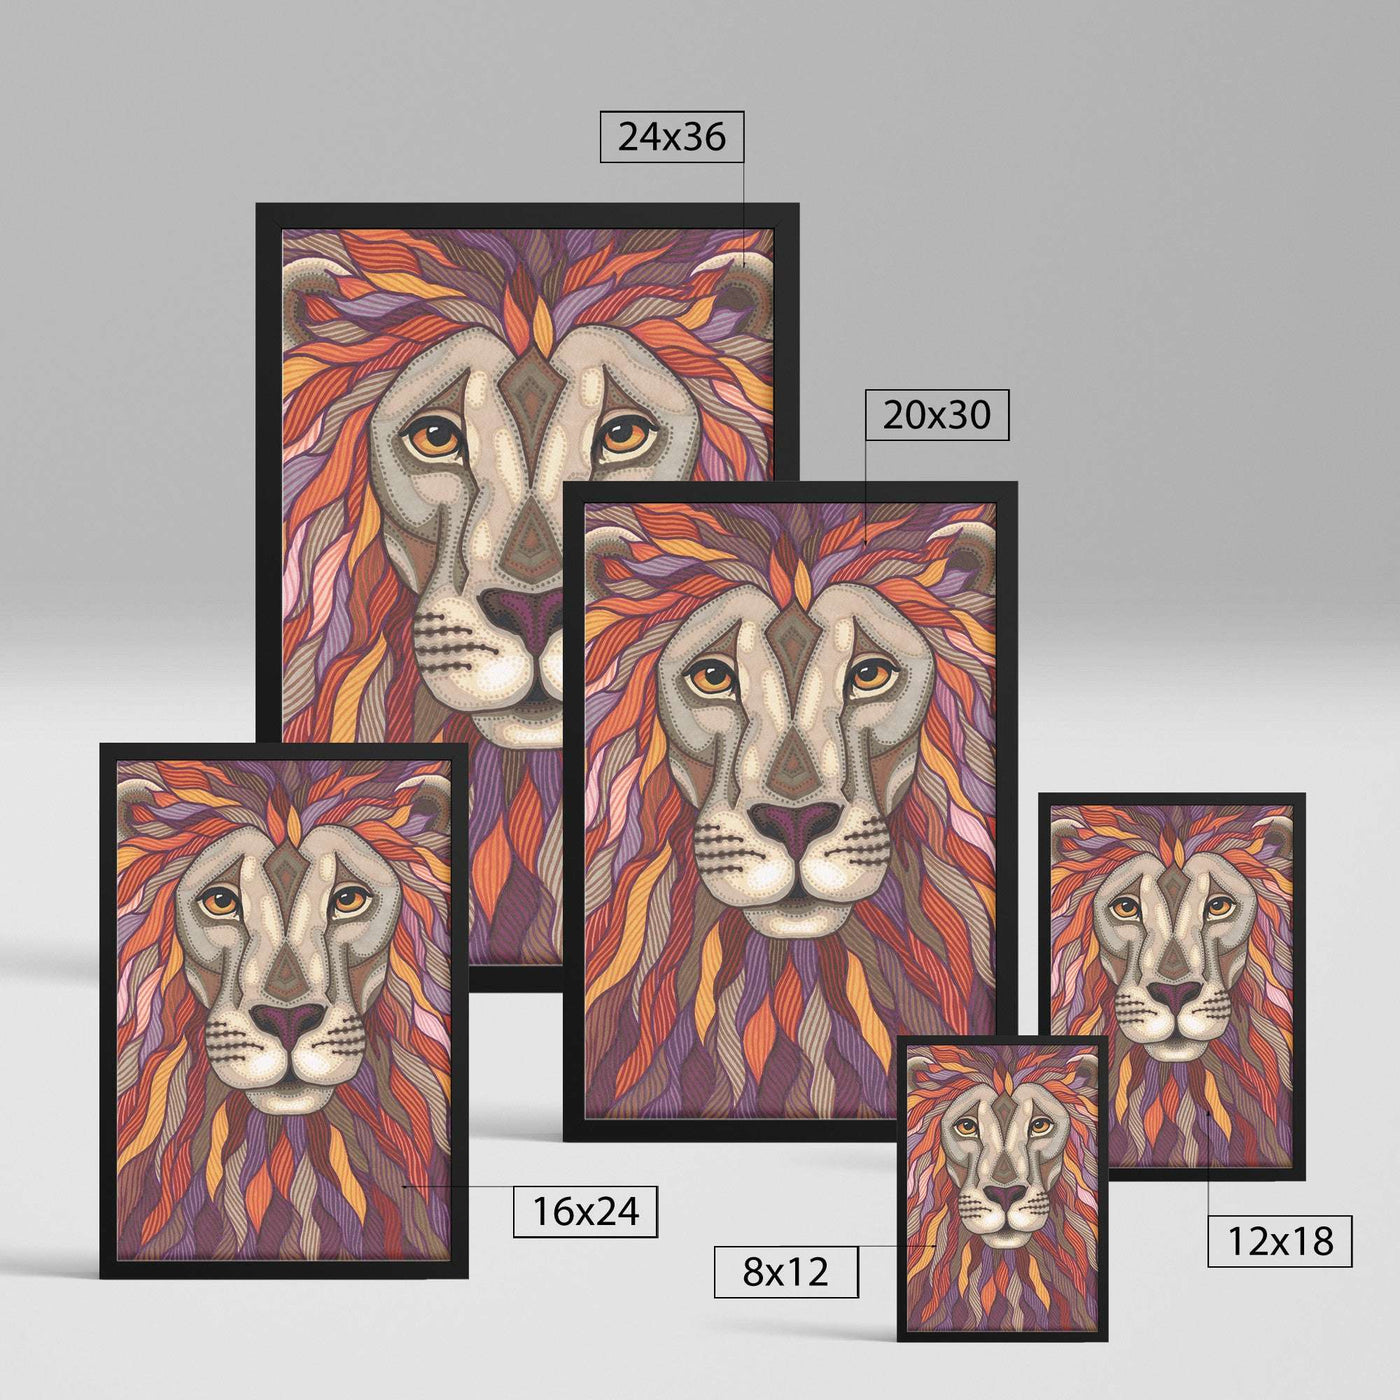 Five Lion Pride Framed Prints of a stylized lion's face with vibrant, multicolored mane, displayed in various sizes on a light gray background.